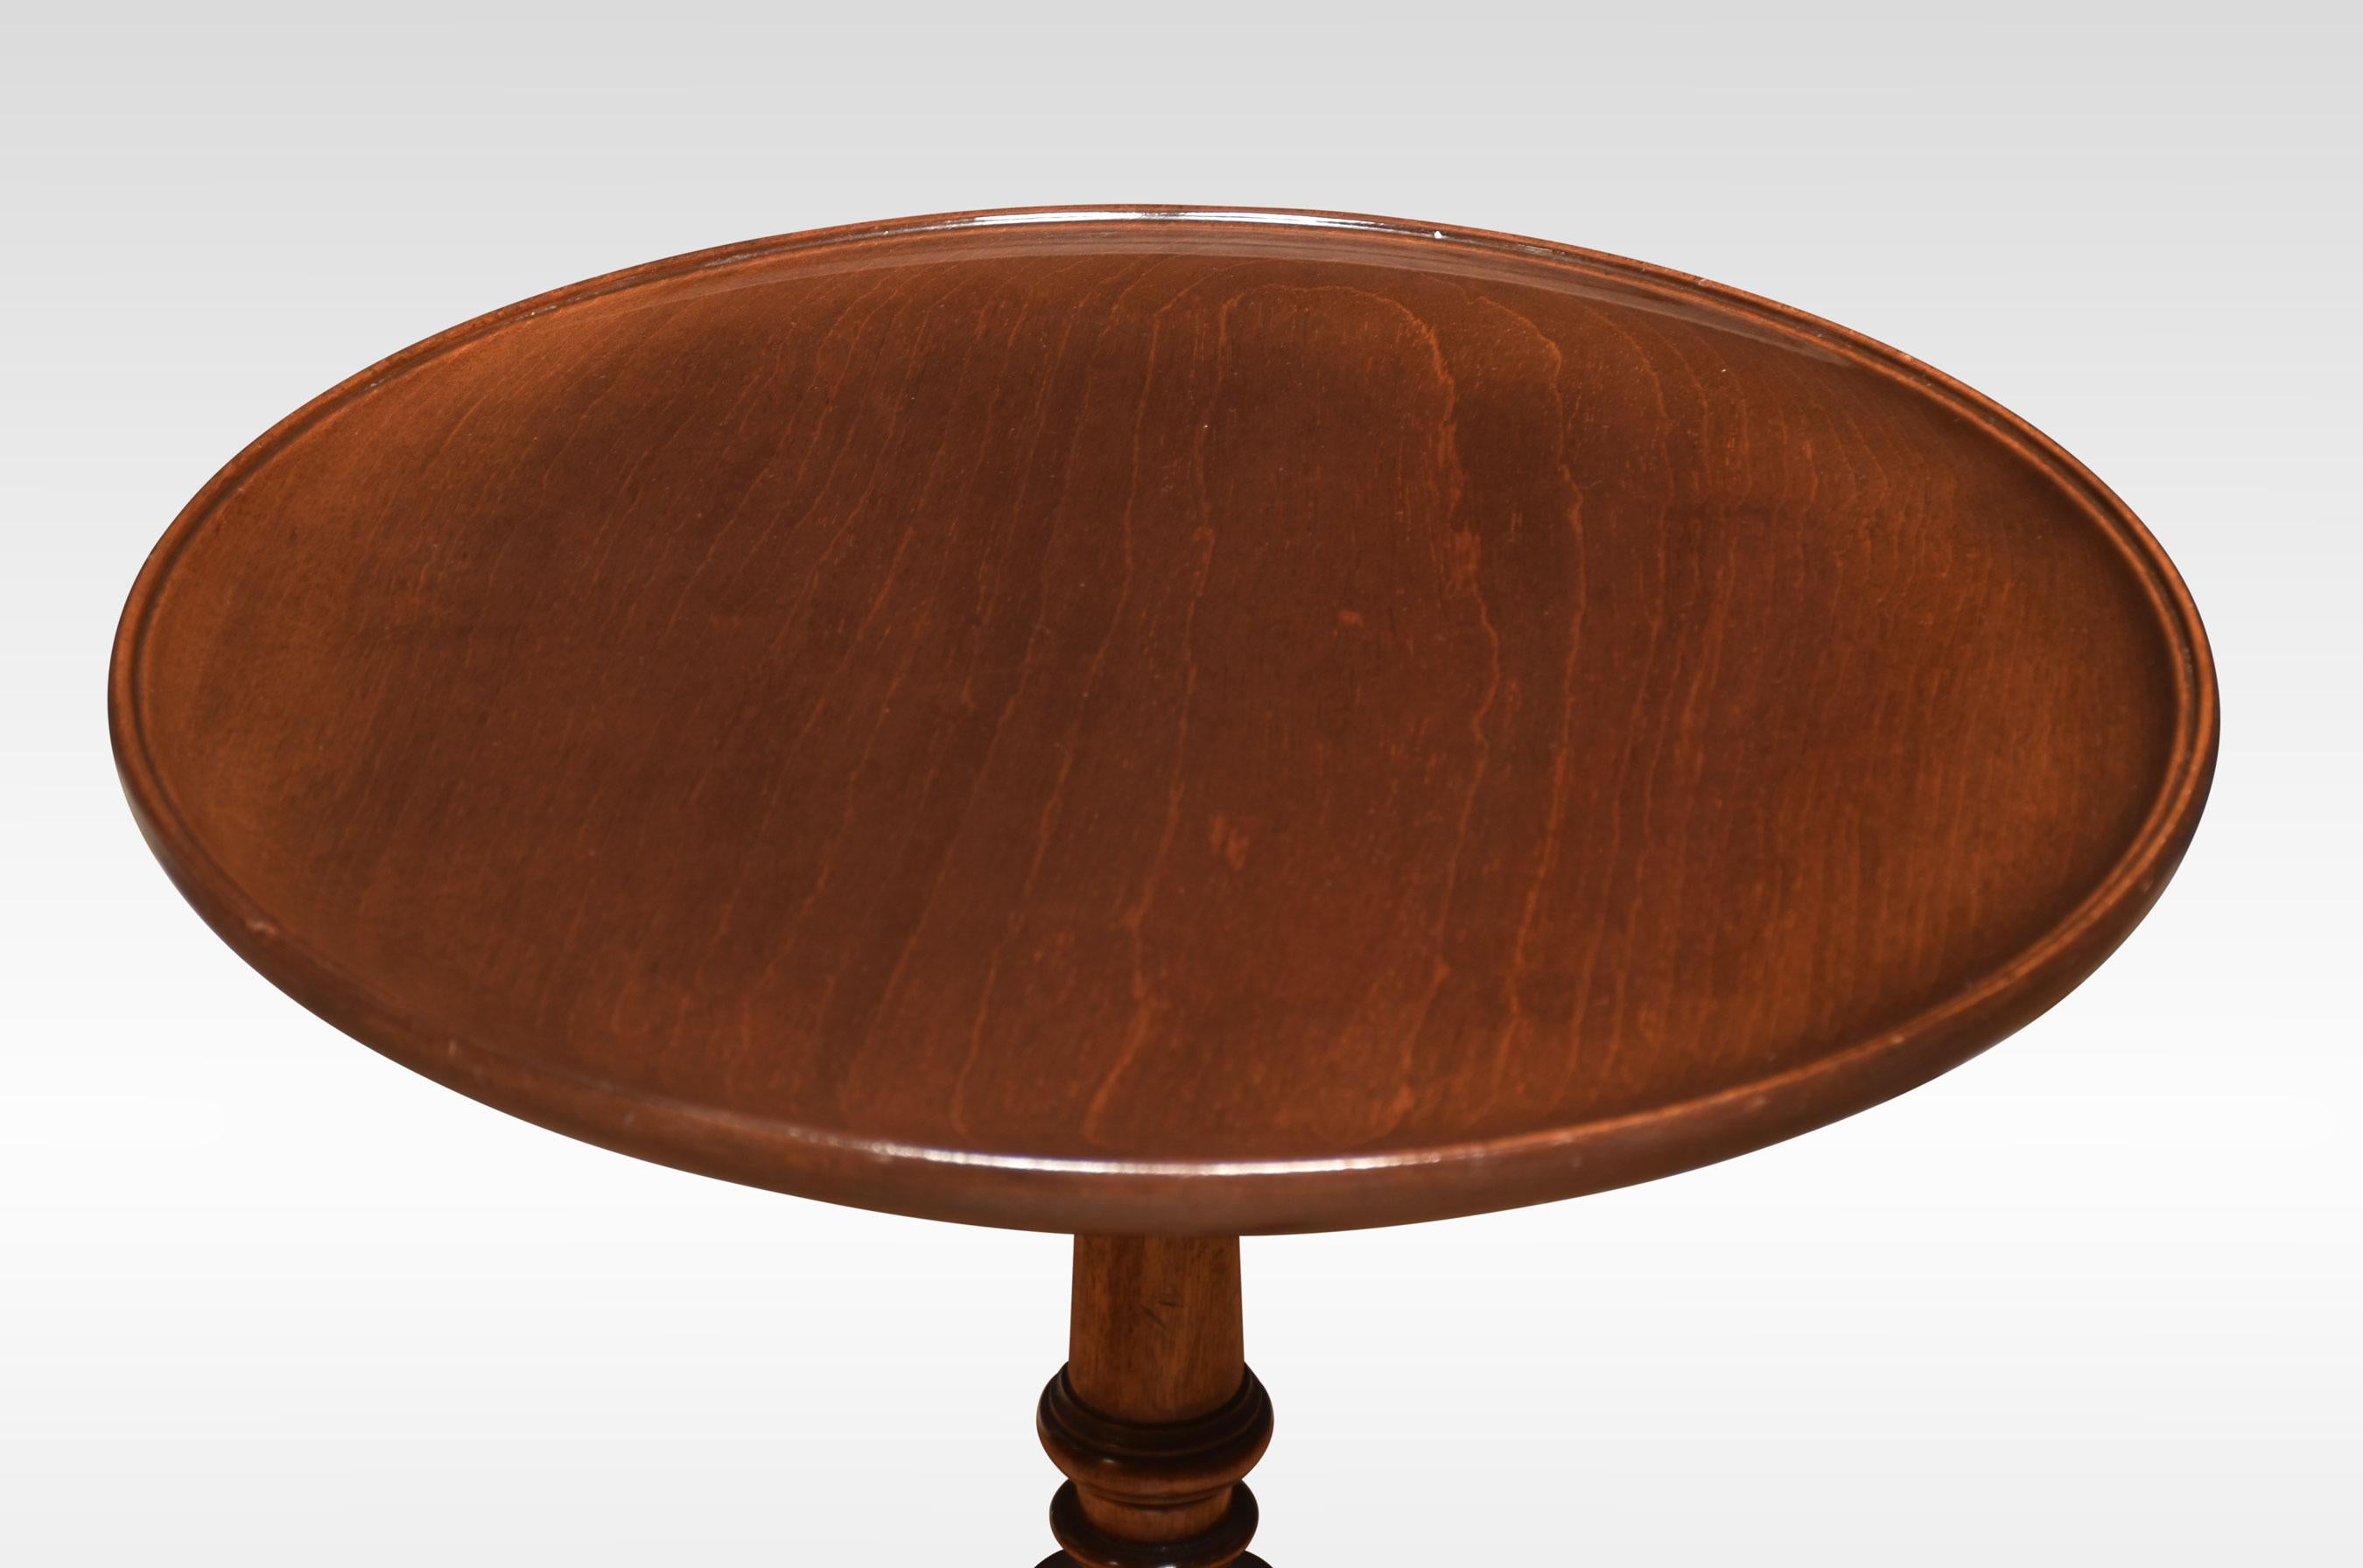 Pair of side tables the circular mahogany tops raised up on turned stems on three downswept supports terminating in pad feet.
Dimensions
Height 21 inches
Width 17 inches
Depth 17 inches.